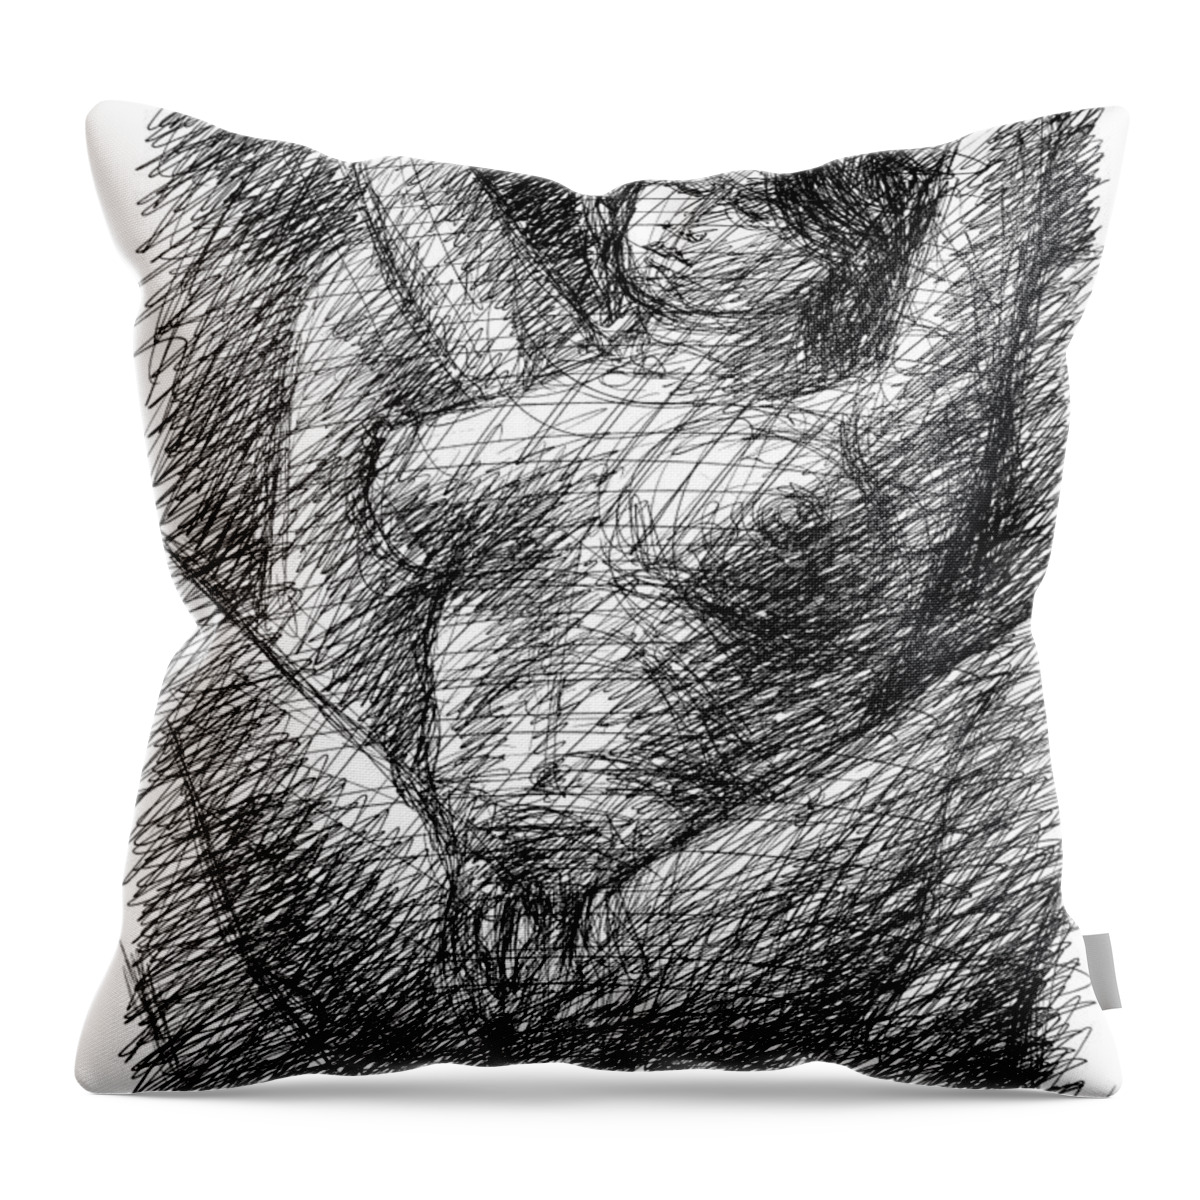 Female Erotic Drawings Throw Pillow featuring the drawing Female-Sexy-Drawings-10 by Gordon Punt